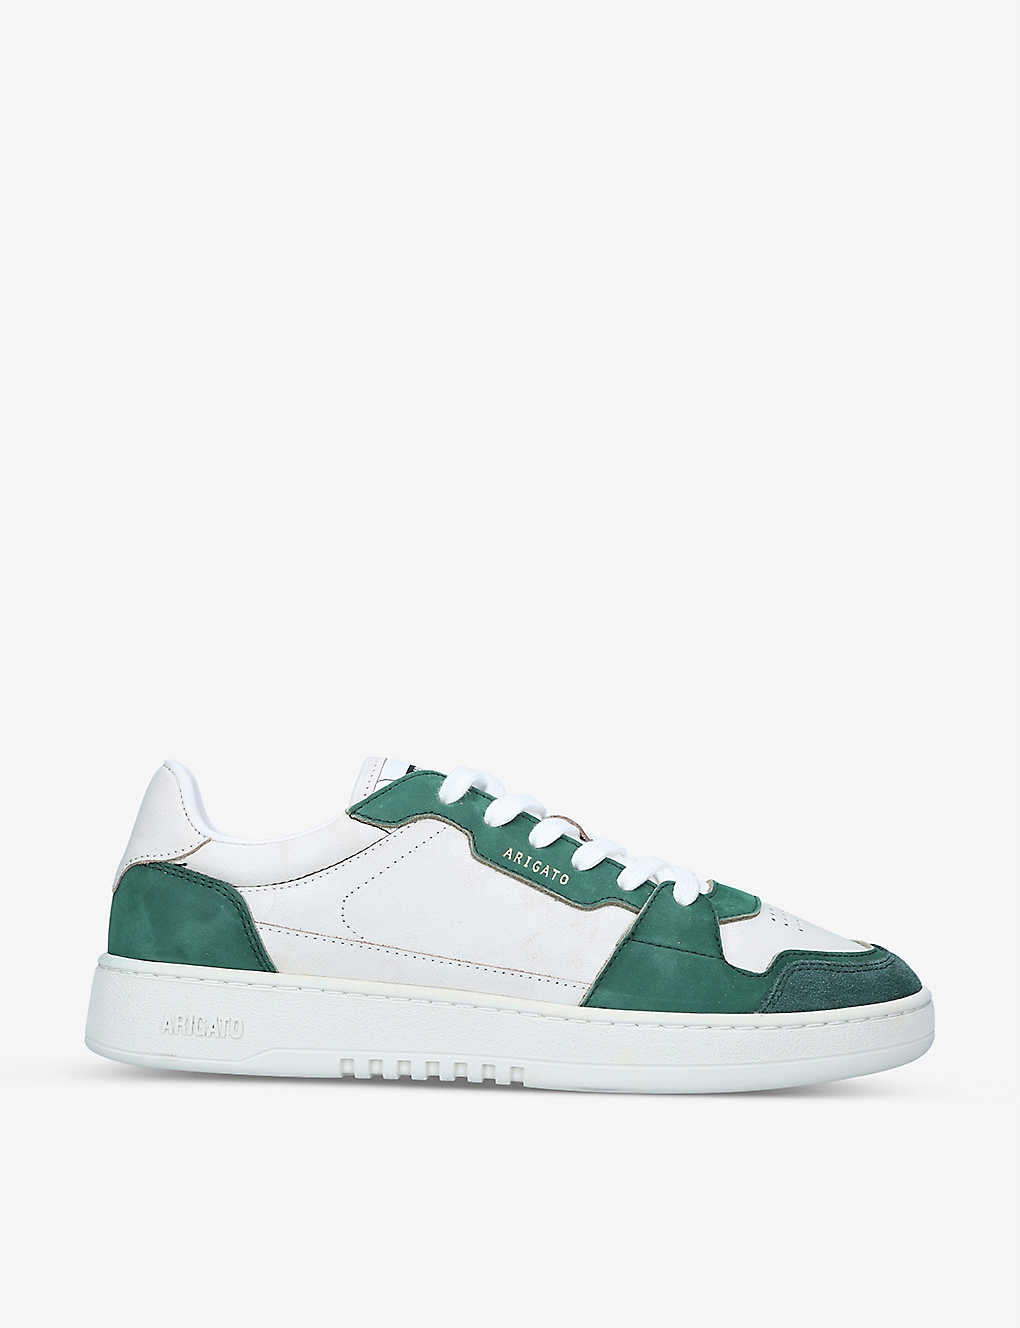 Shop Axel Arigato Men's Green Comb Dice Leather And Suede Low-top Trainers